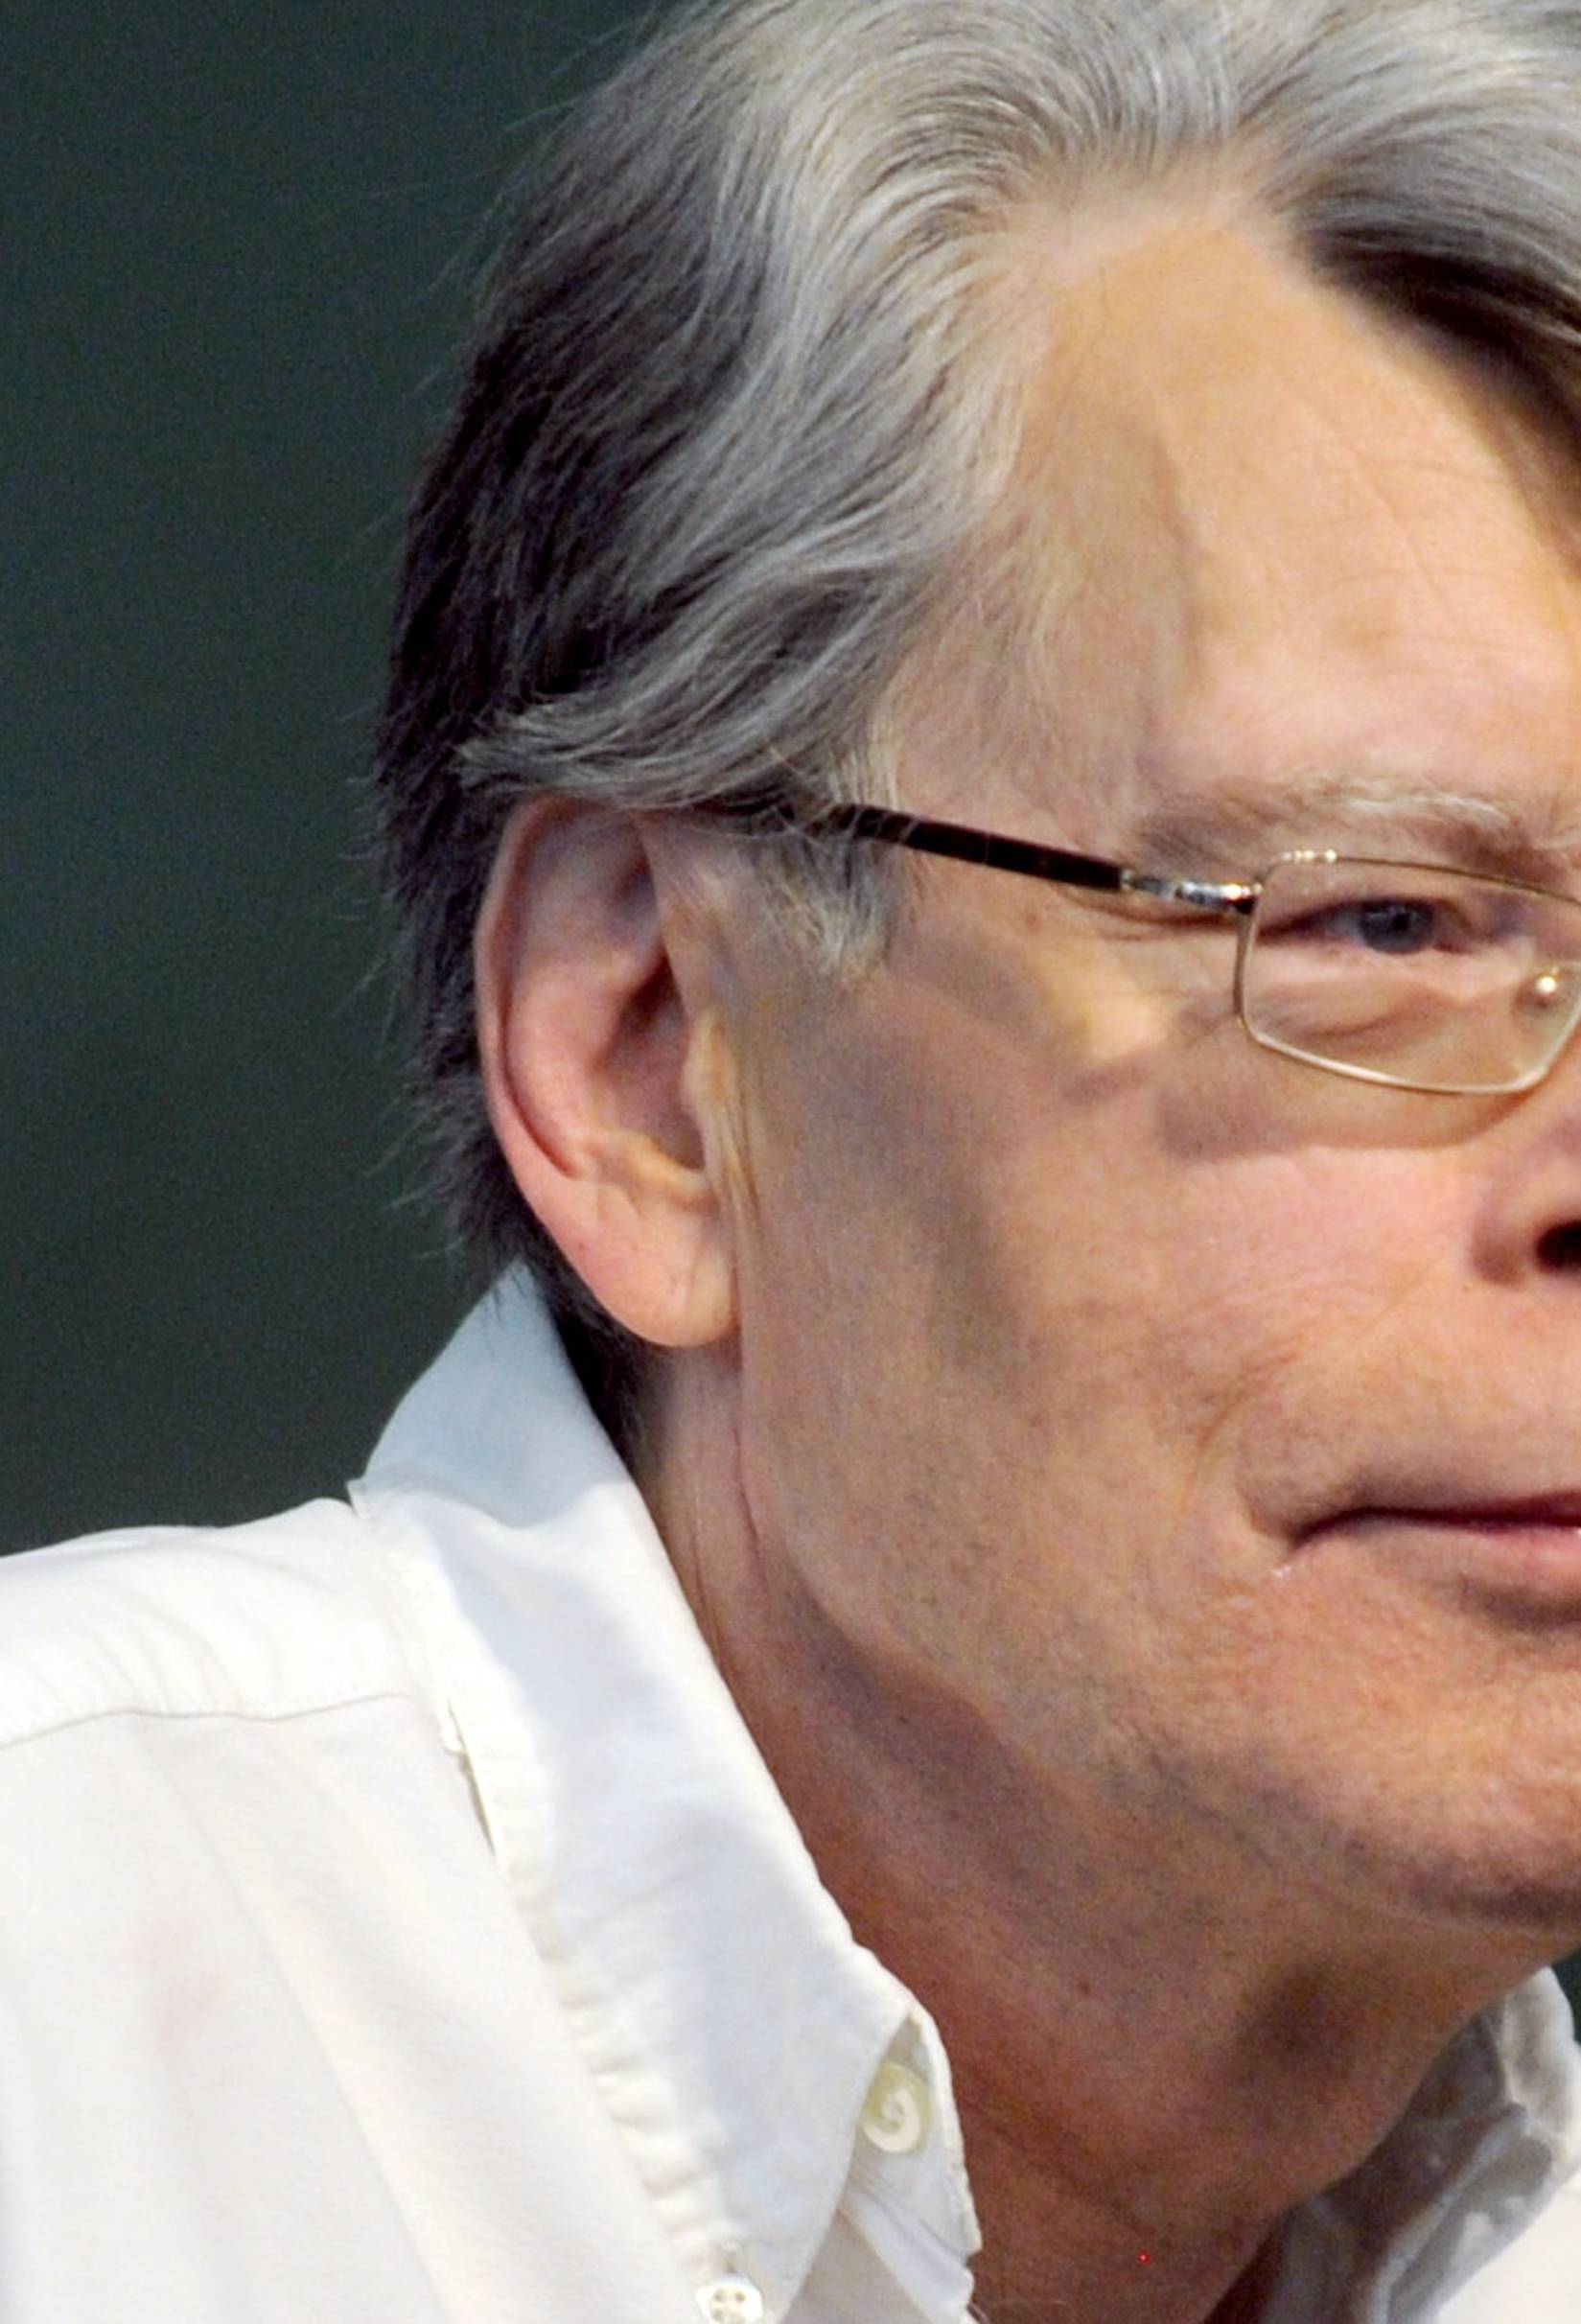 Stephen King Signs Copies of New Book "Revival" - New York City